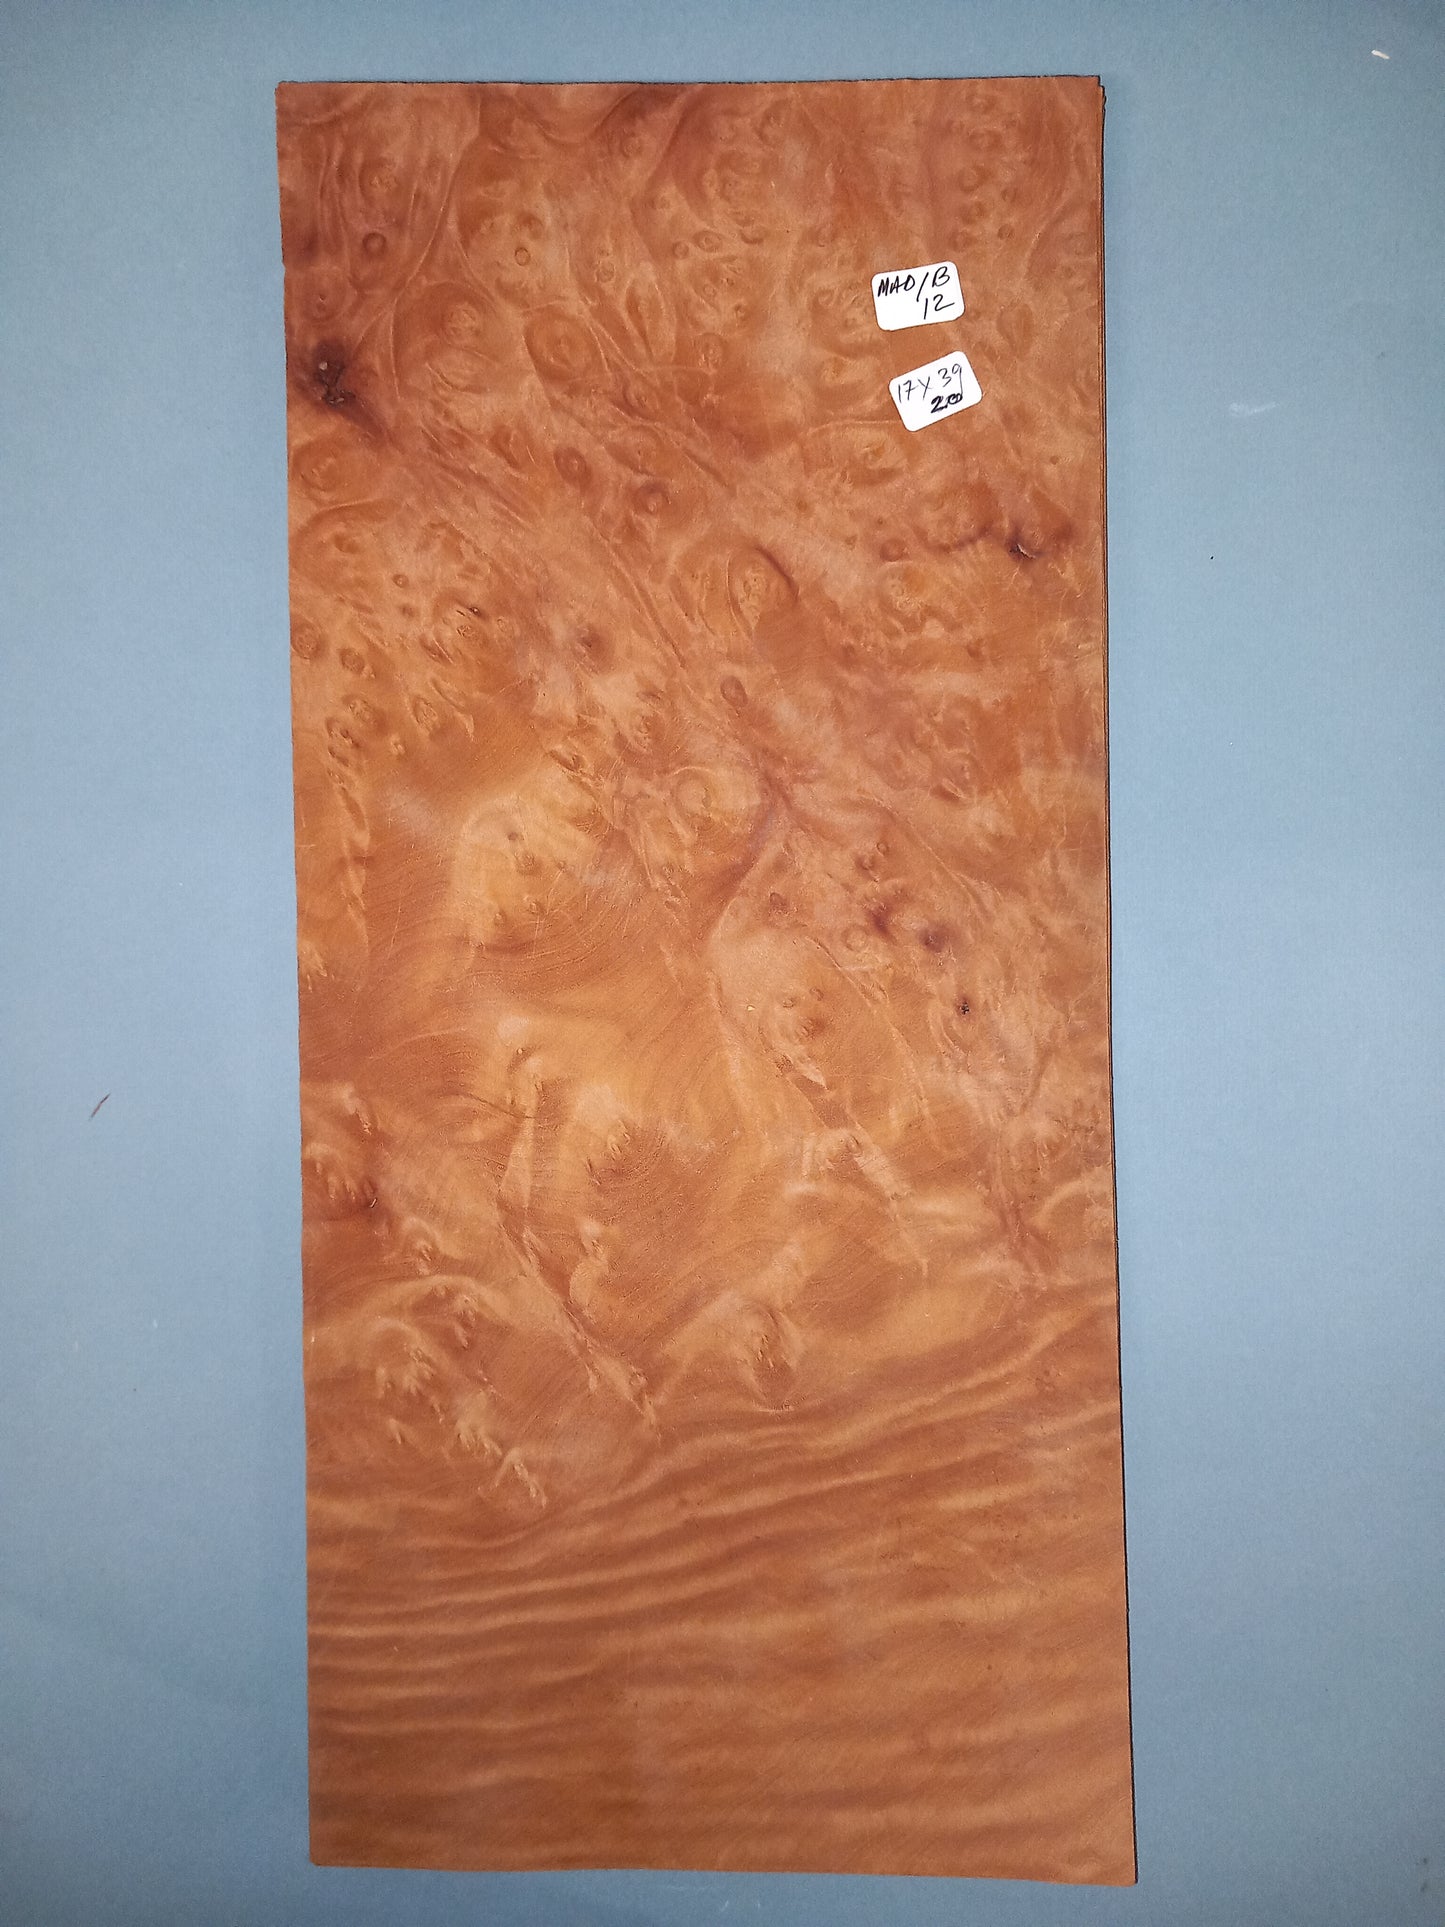 CONSECUTIVE SHEETS OF MADRONE BURR VENEER   17 X 39 CM